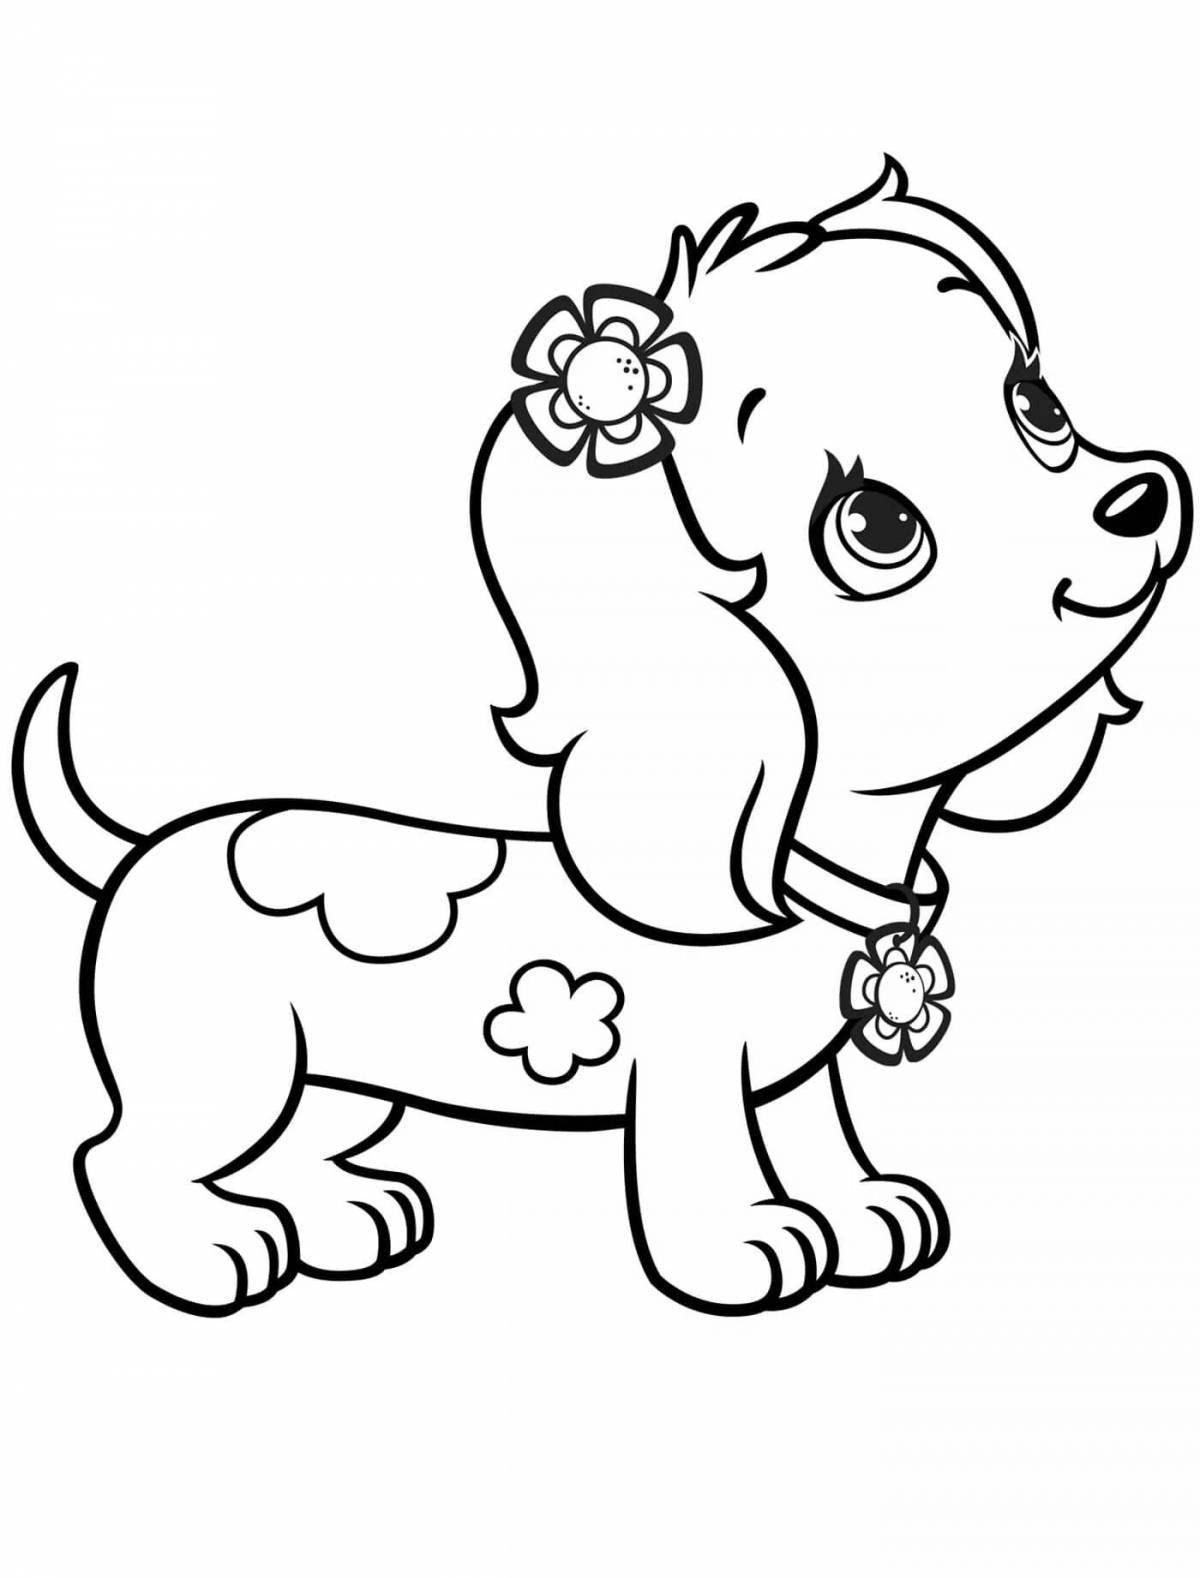 Coloring puppy for kids